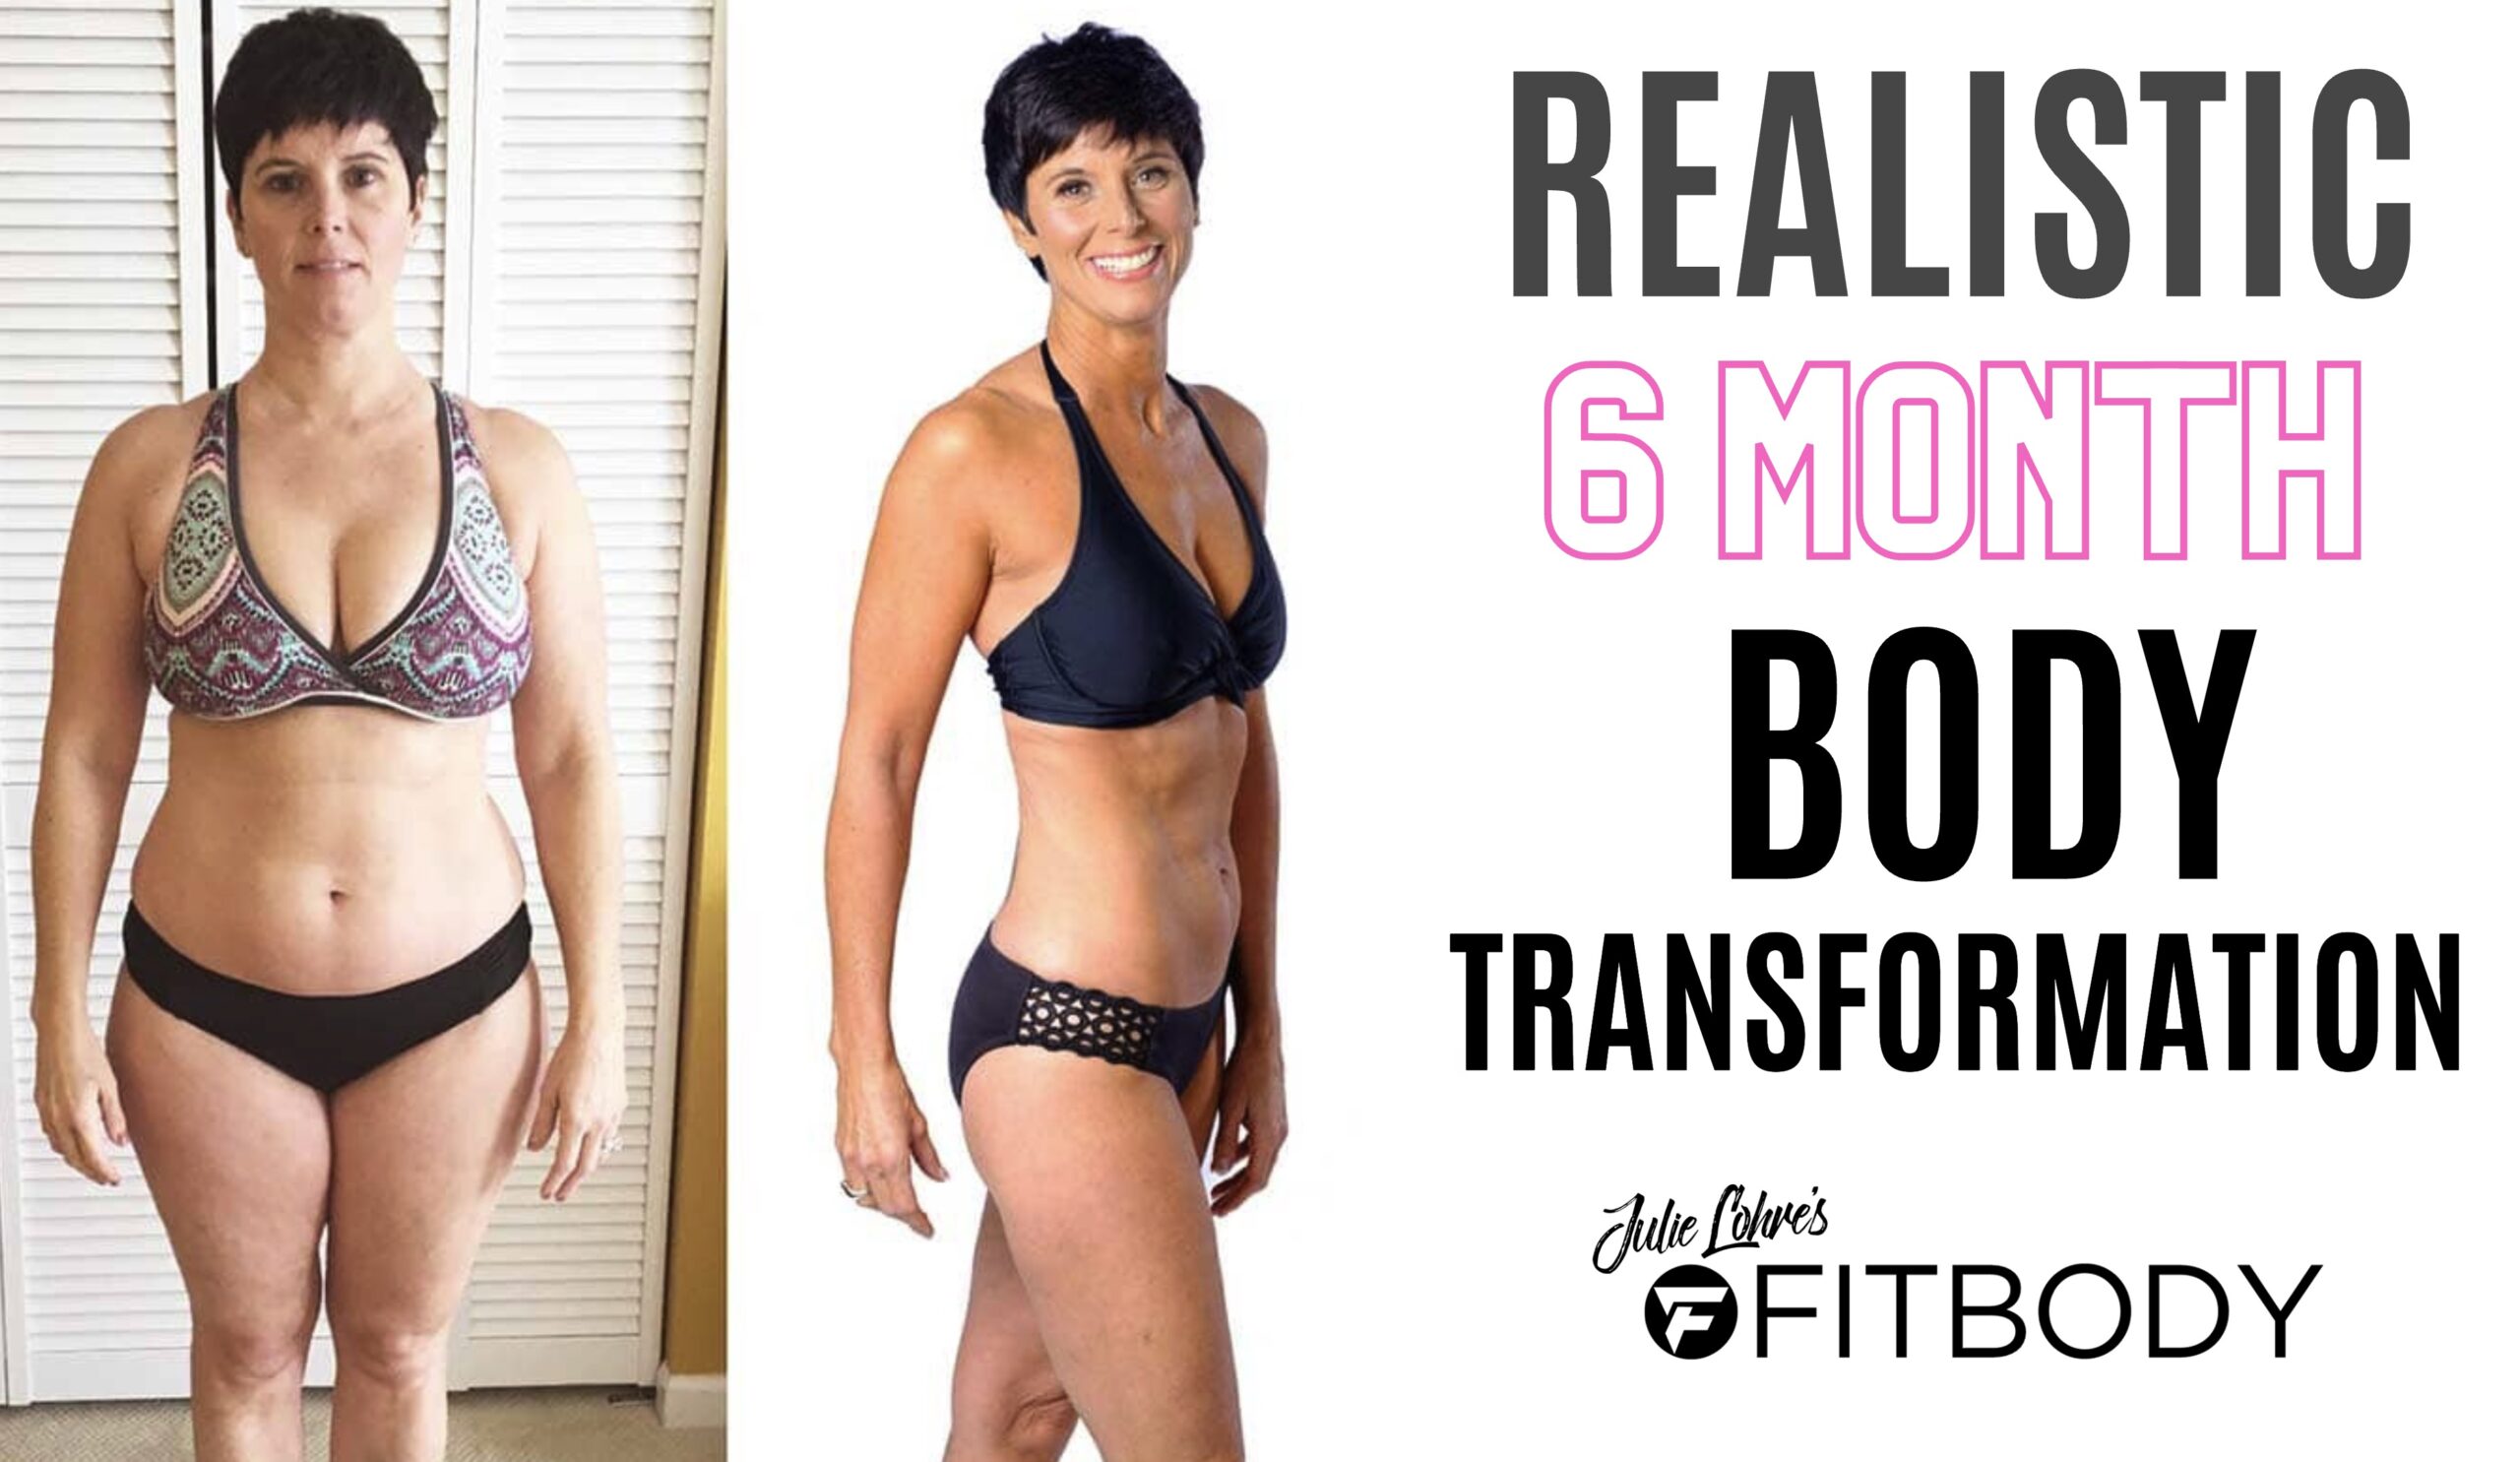 6 Month Body Transformation  Realistic Before & After Female Weight Loss